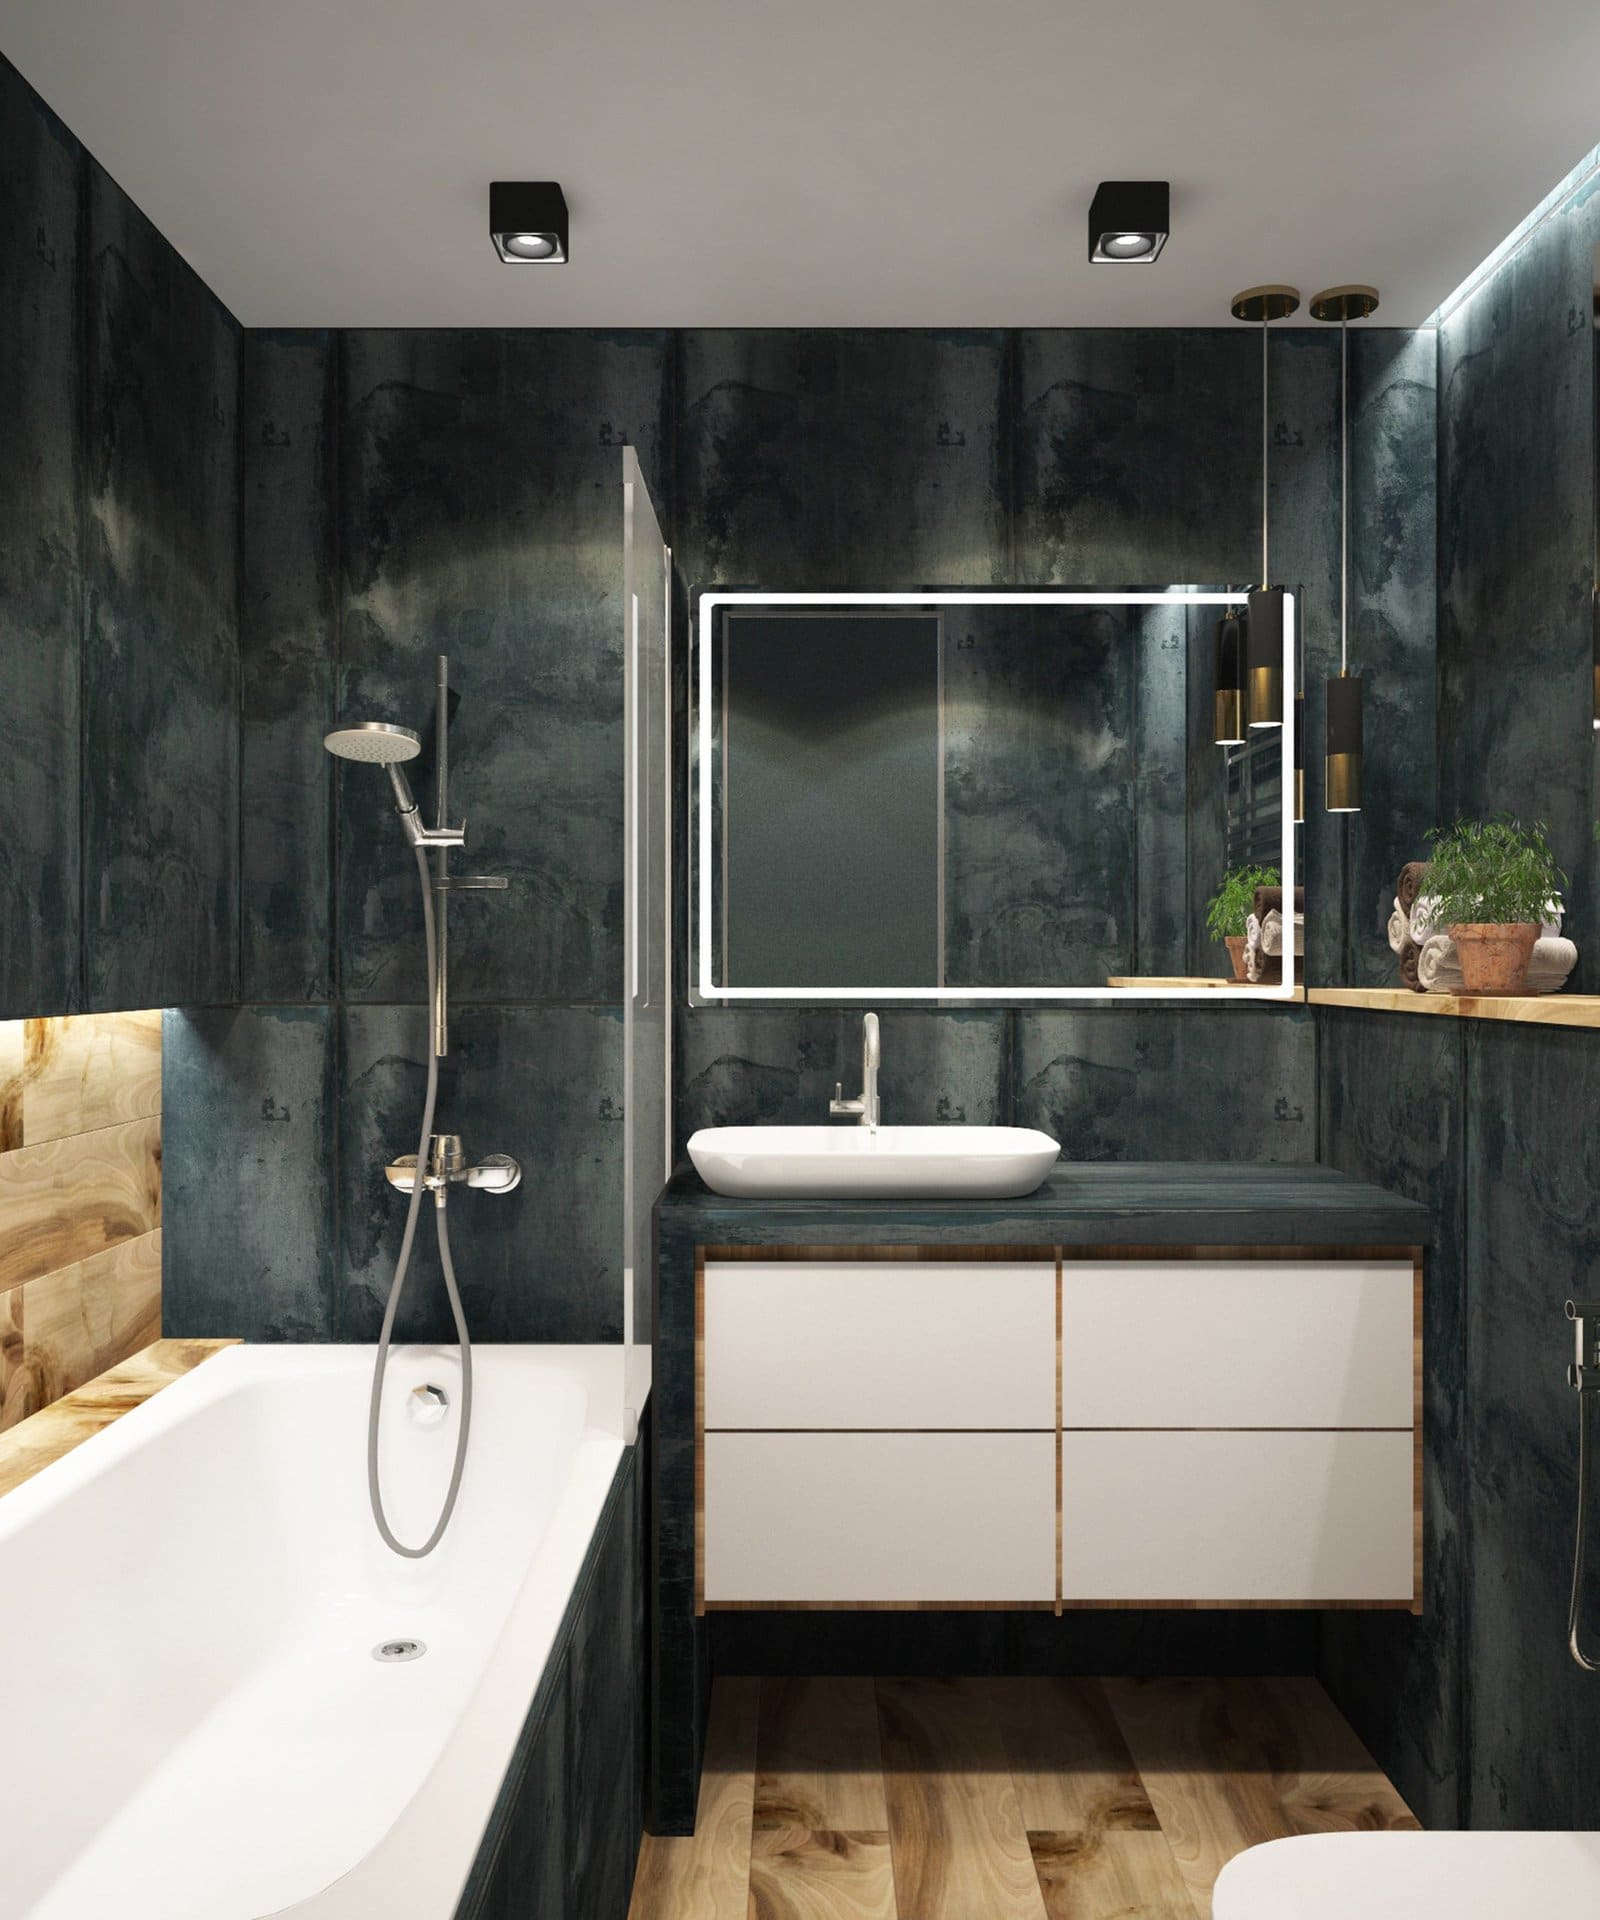  Try a Dark and Wood Tile for a Masculine Look scaled